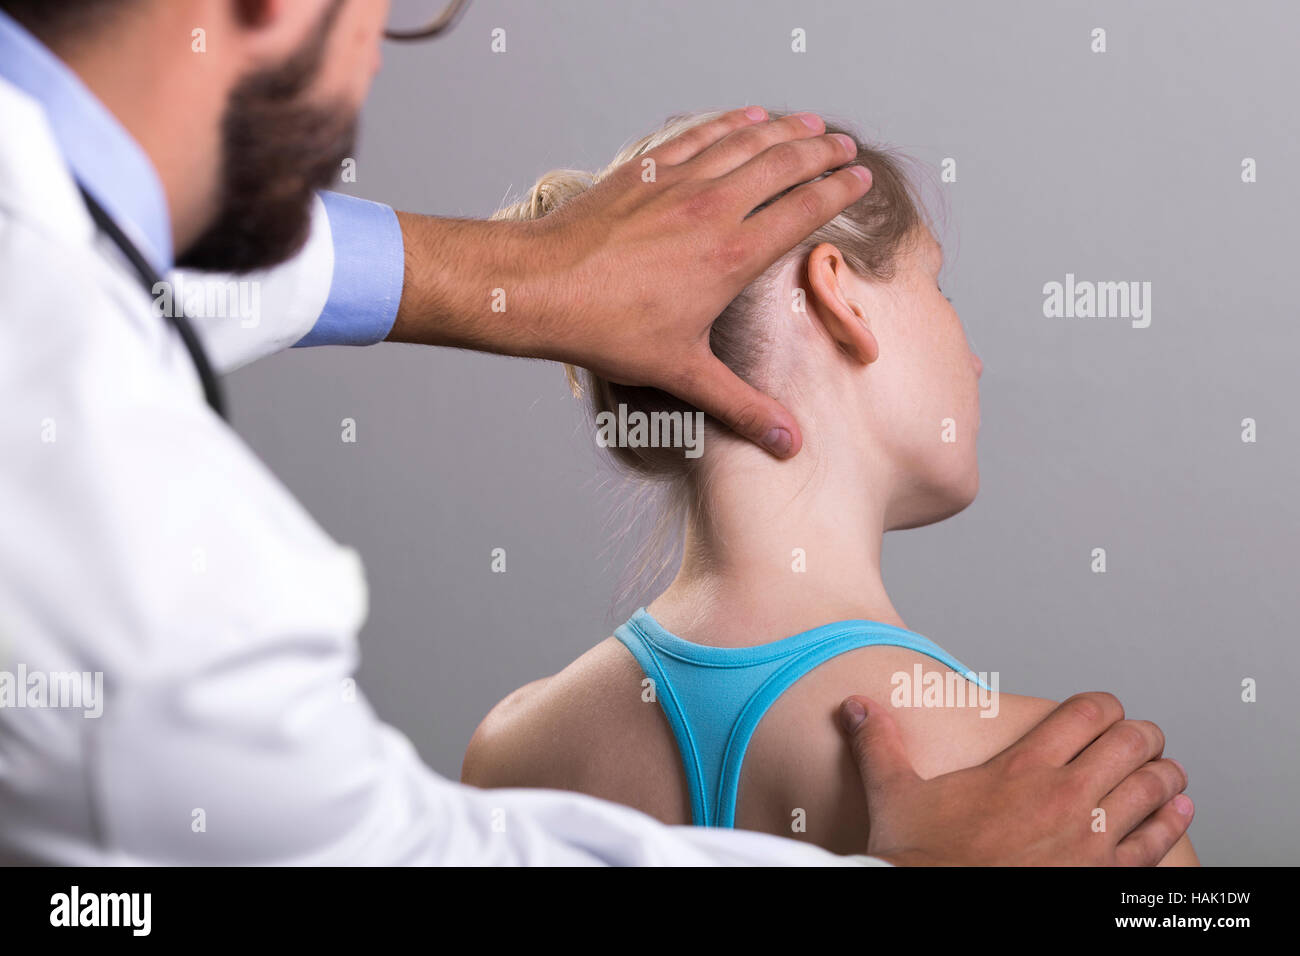 physiotherapist stretching the injured woman's neck Stock Photo